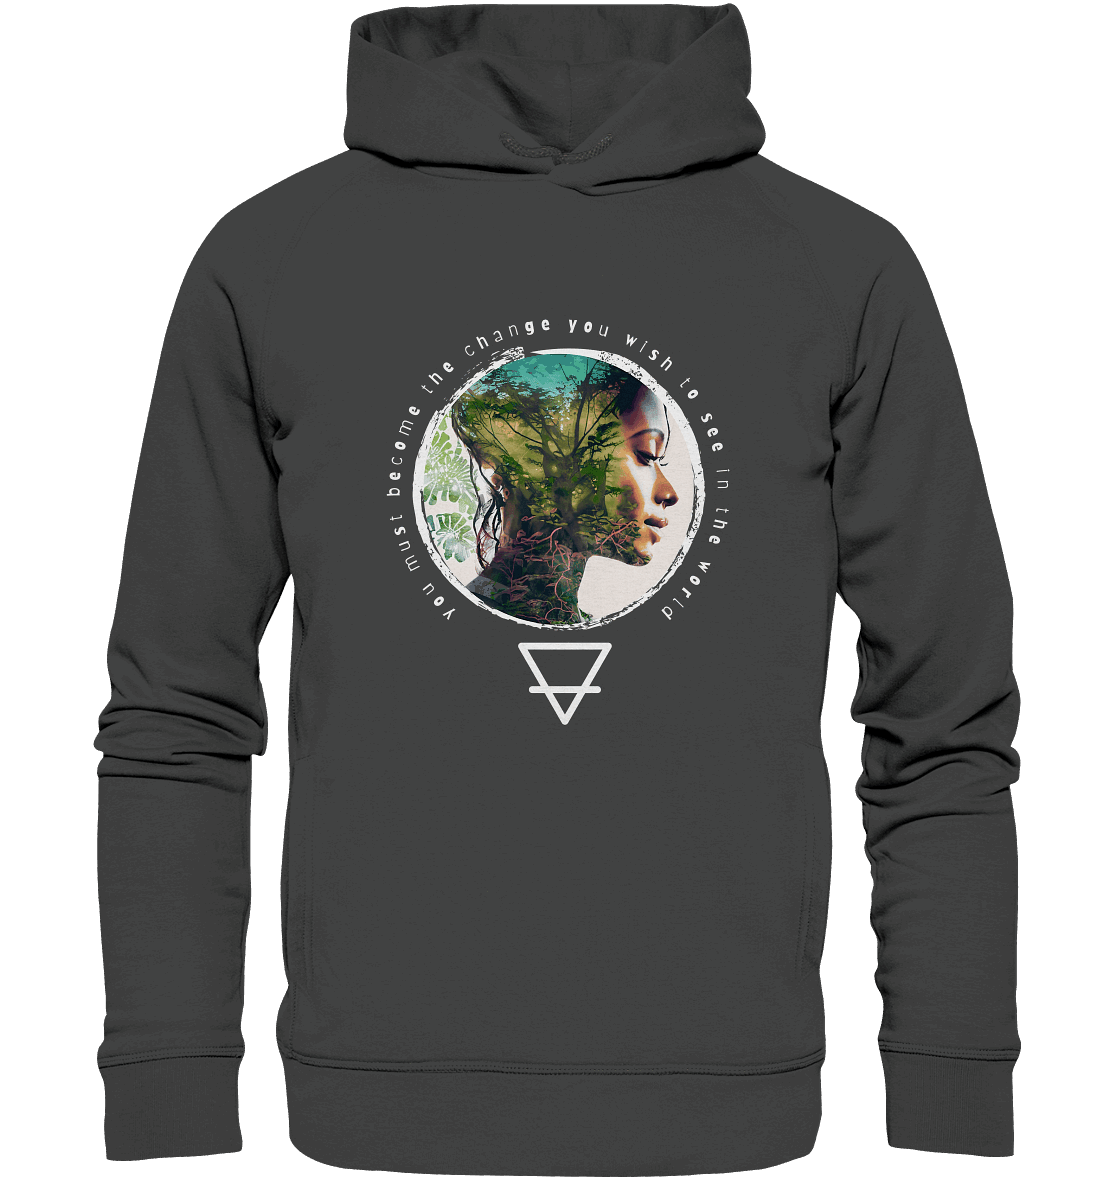 Nature - You must become the change you wish to see in the world - Organic Fashion Hoodie